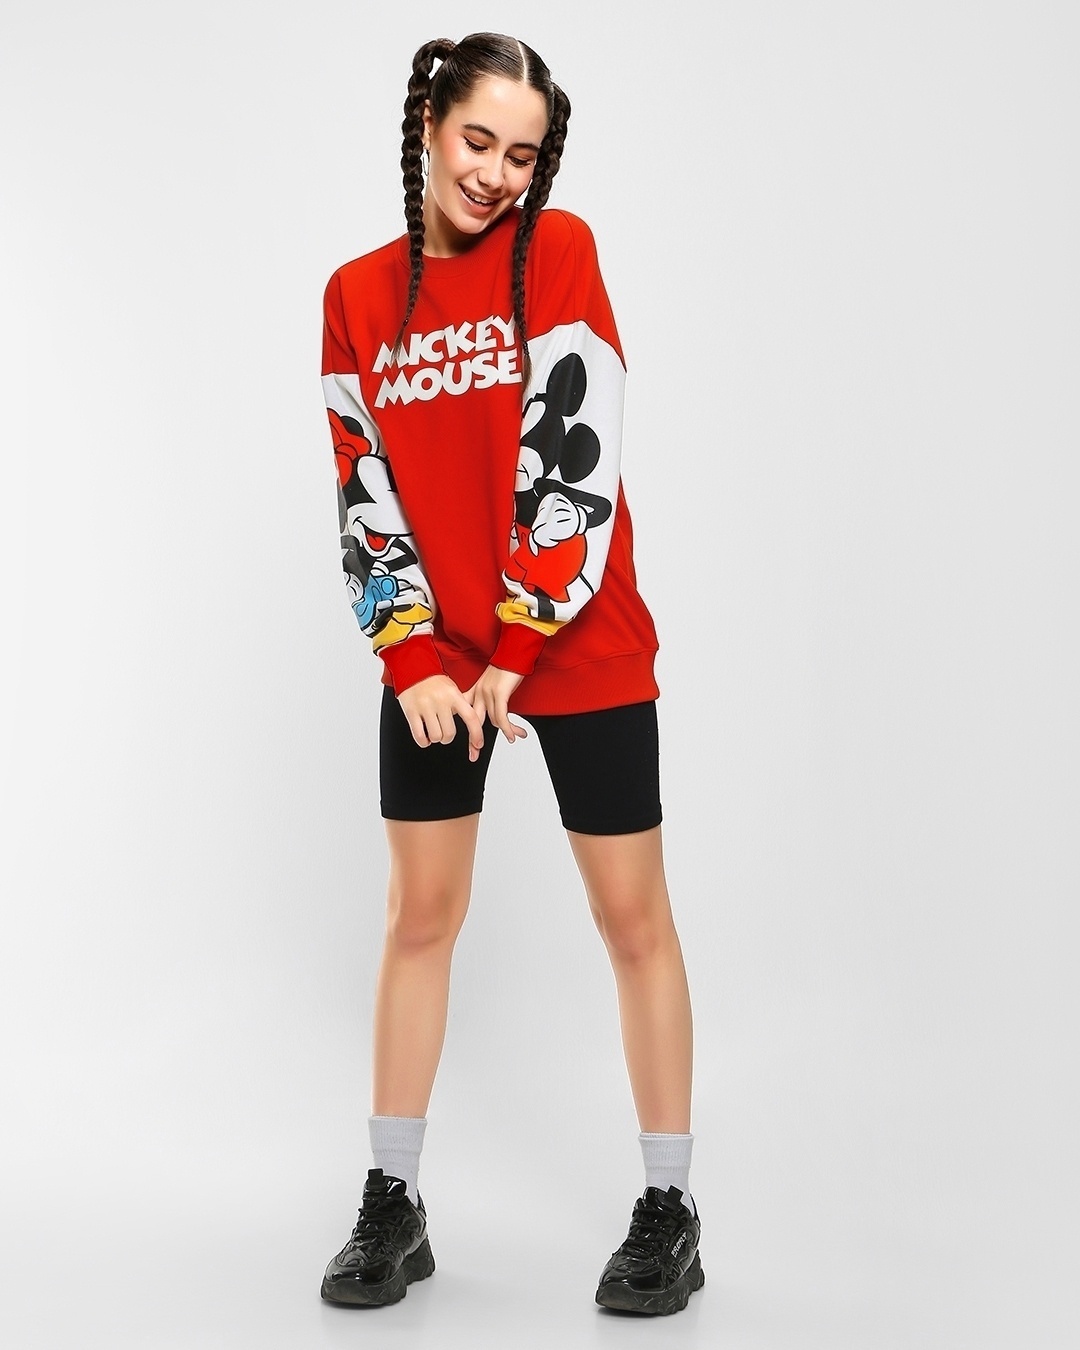 Shop Women's Red Mickey Mouse Graphic Printed Oversized Sweatshirt